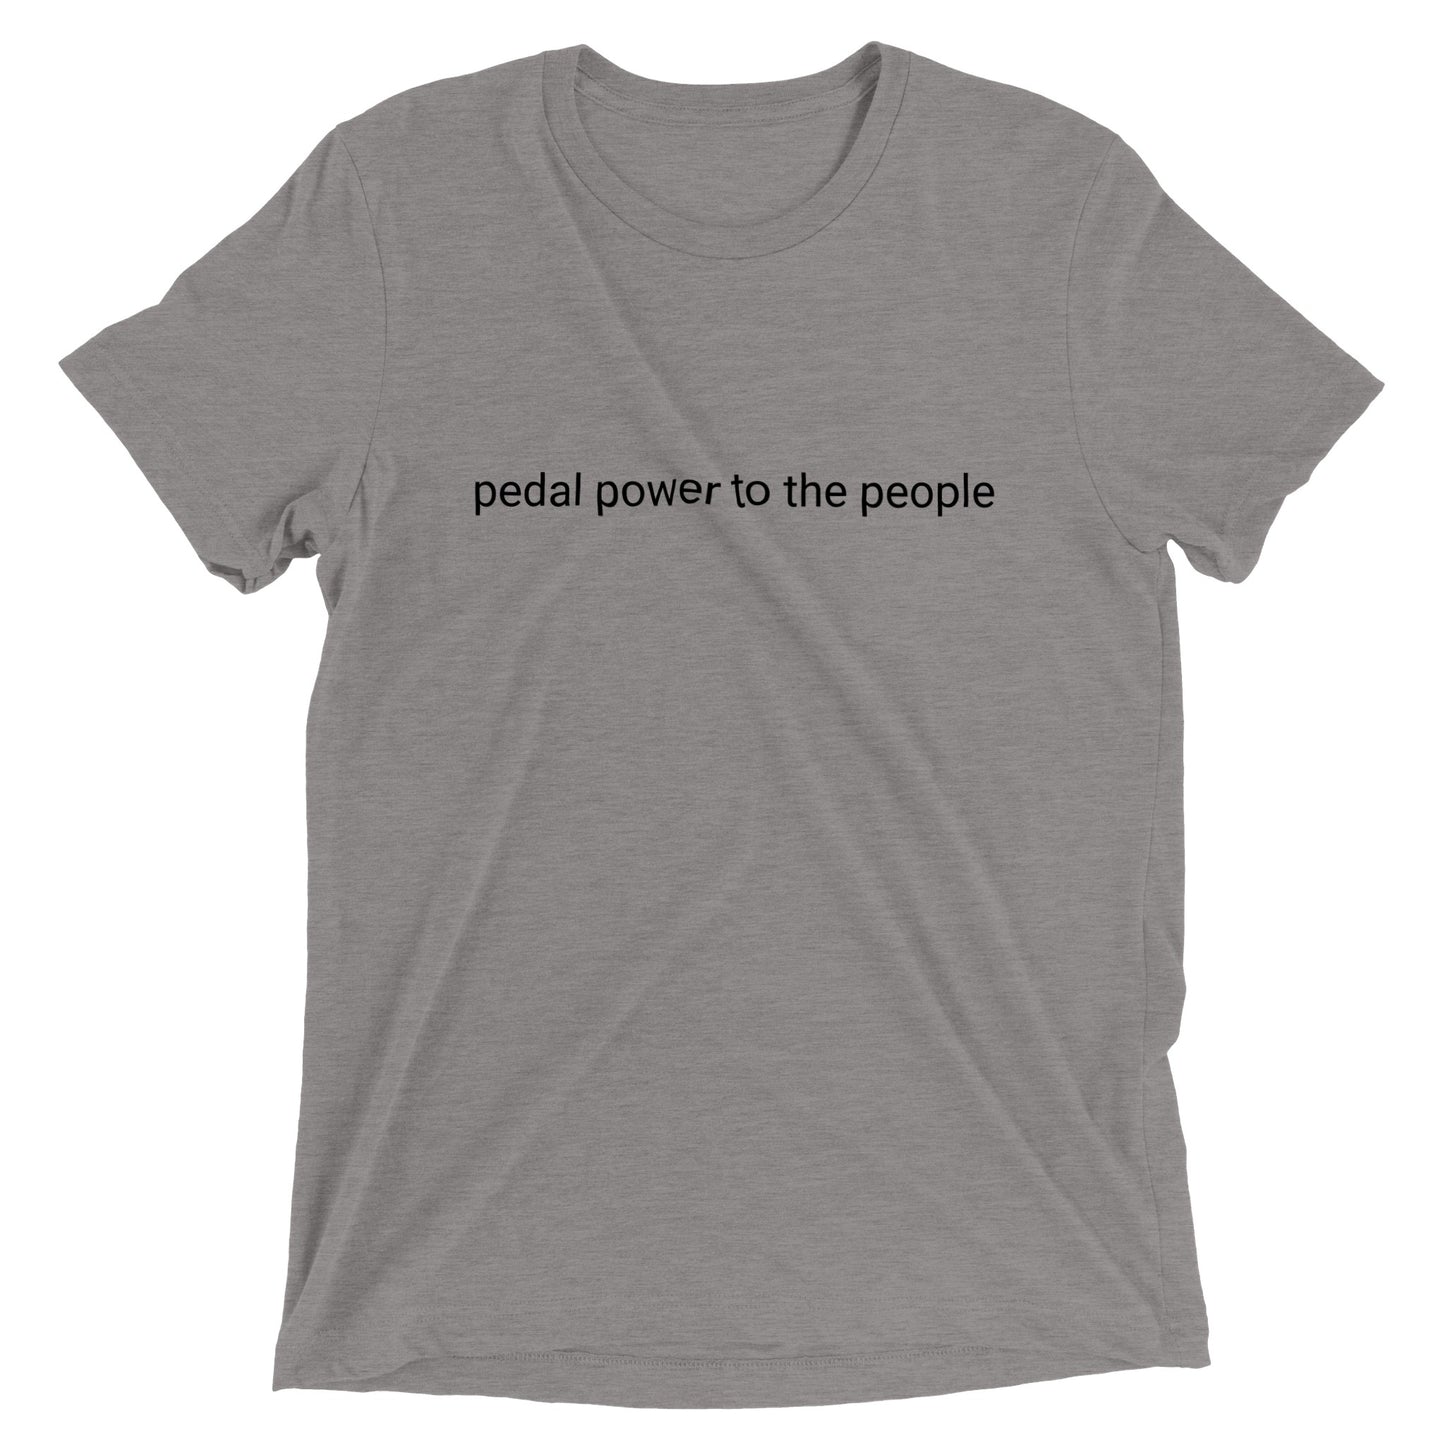 Pedal power to the people - T-shirt ras du cou unisexe Triblend